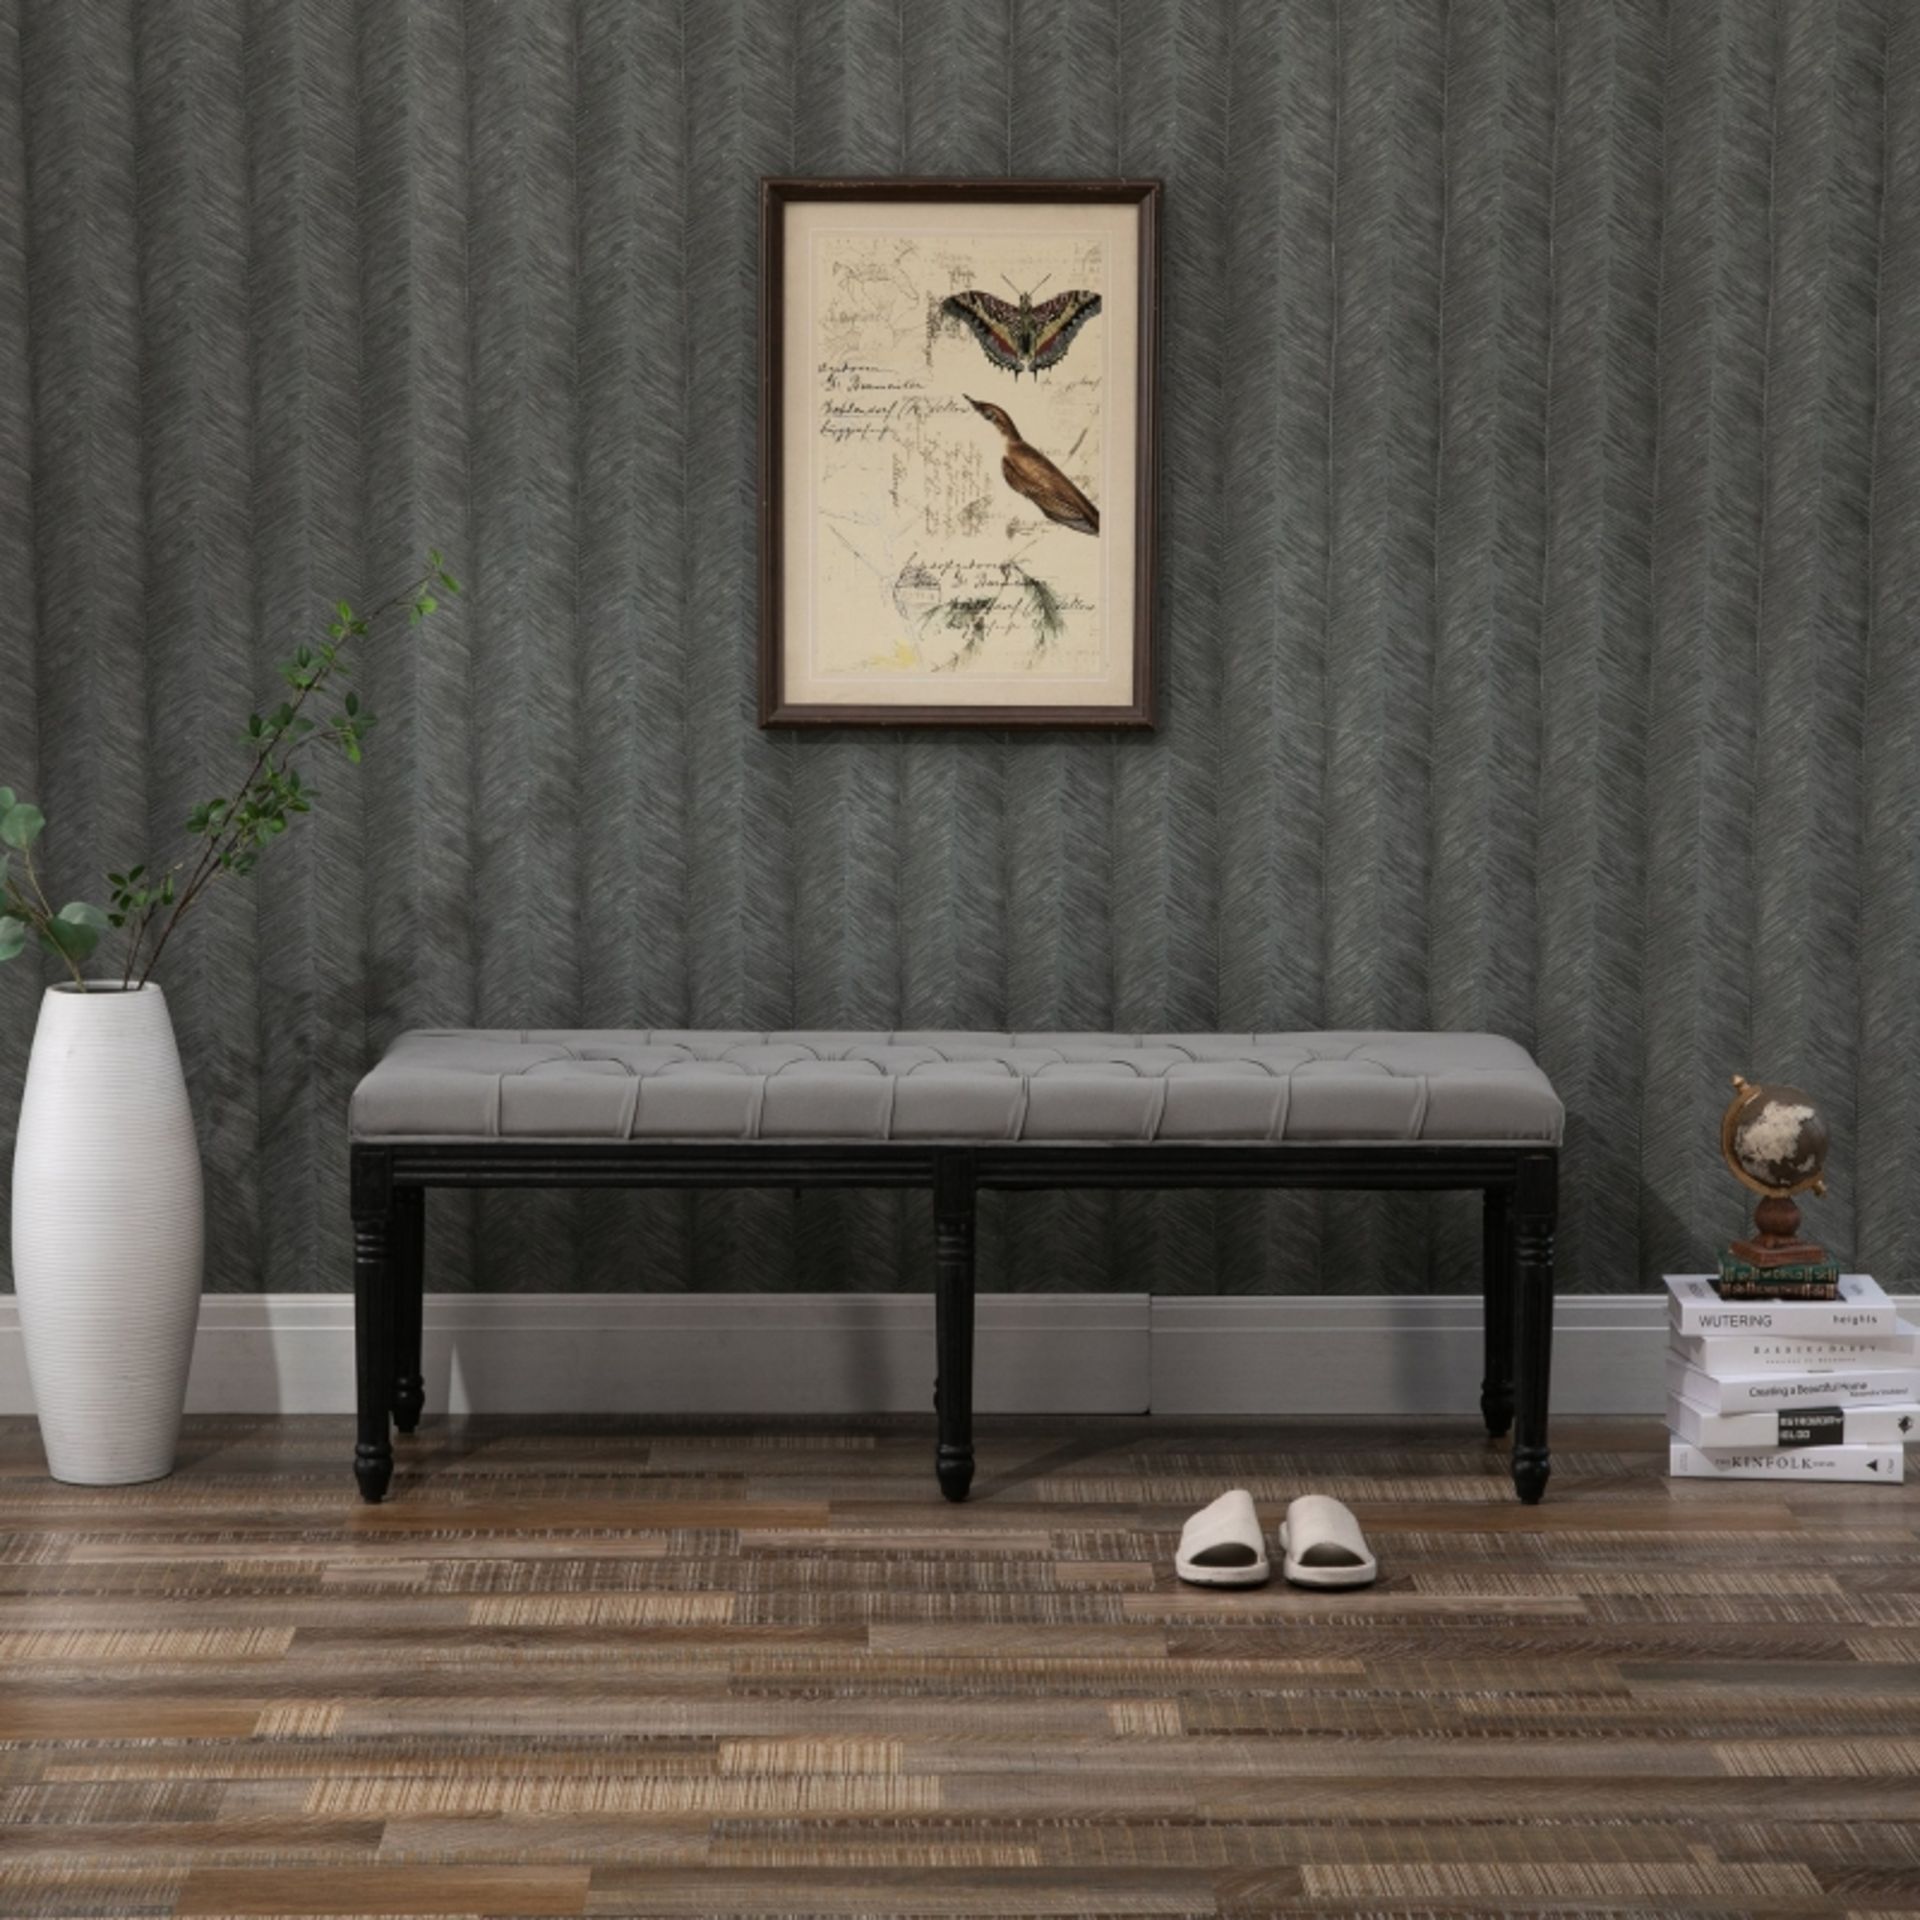 Tufted Upholstered Bench Upholstered In Grey Padded Fabric With Wooden Legs An Elegant Chic Bench